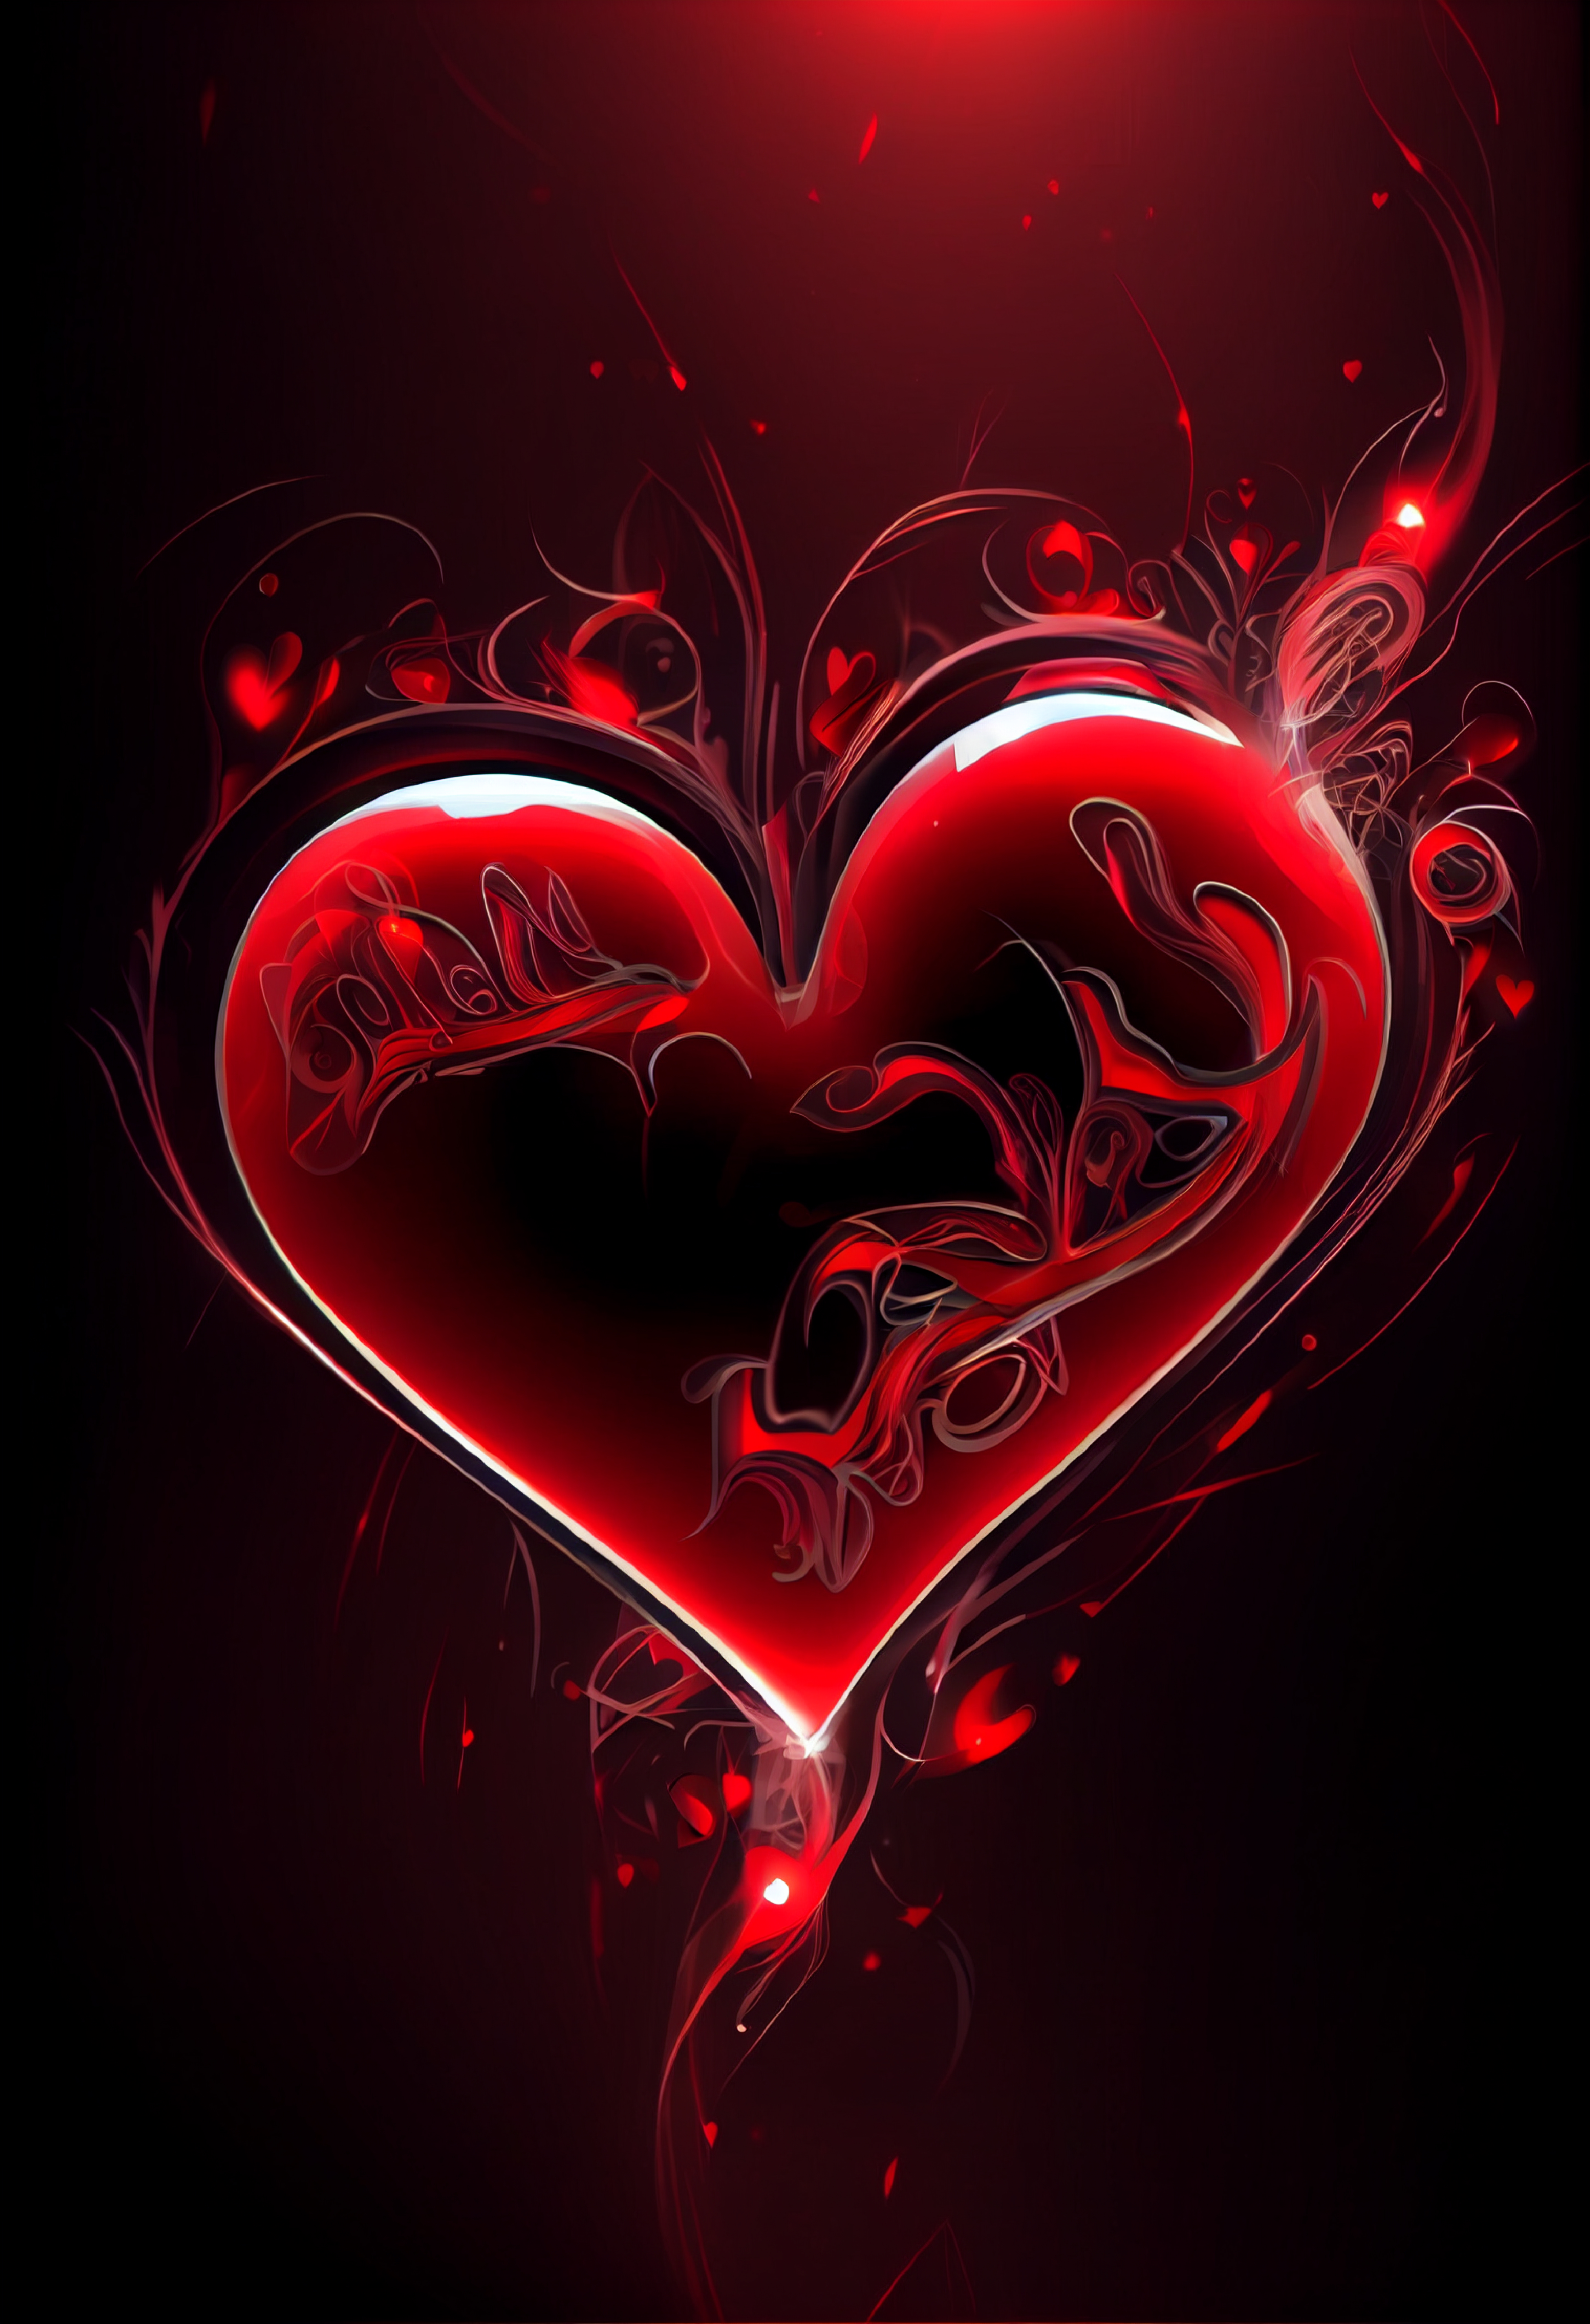 https://files.123freevectors.com/wp-content/original/505262-red-hearts-happy-valentines-day-background.jpg